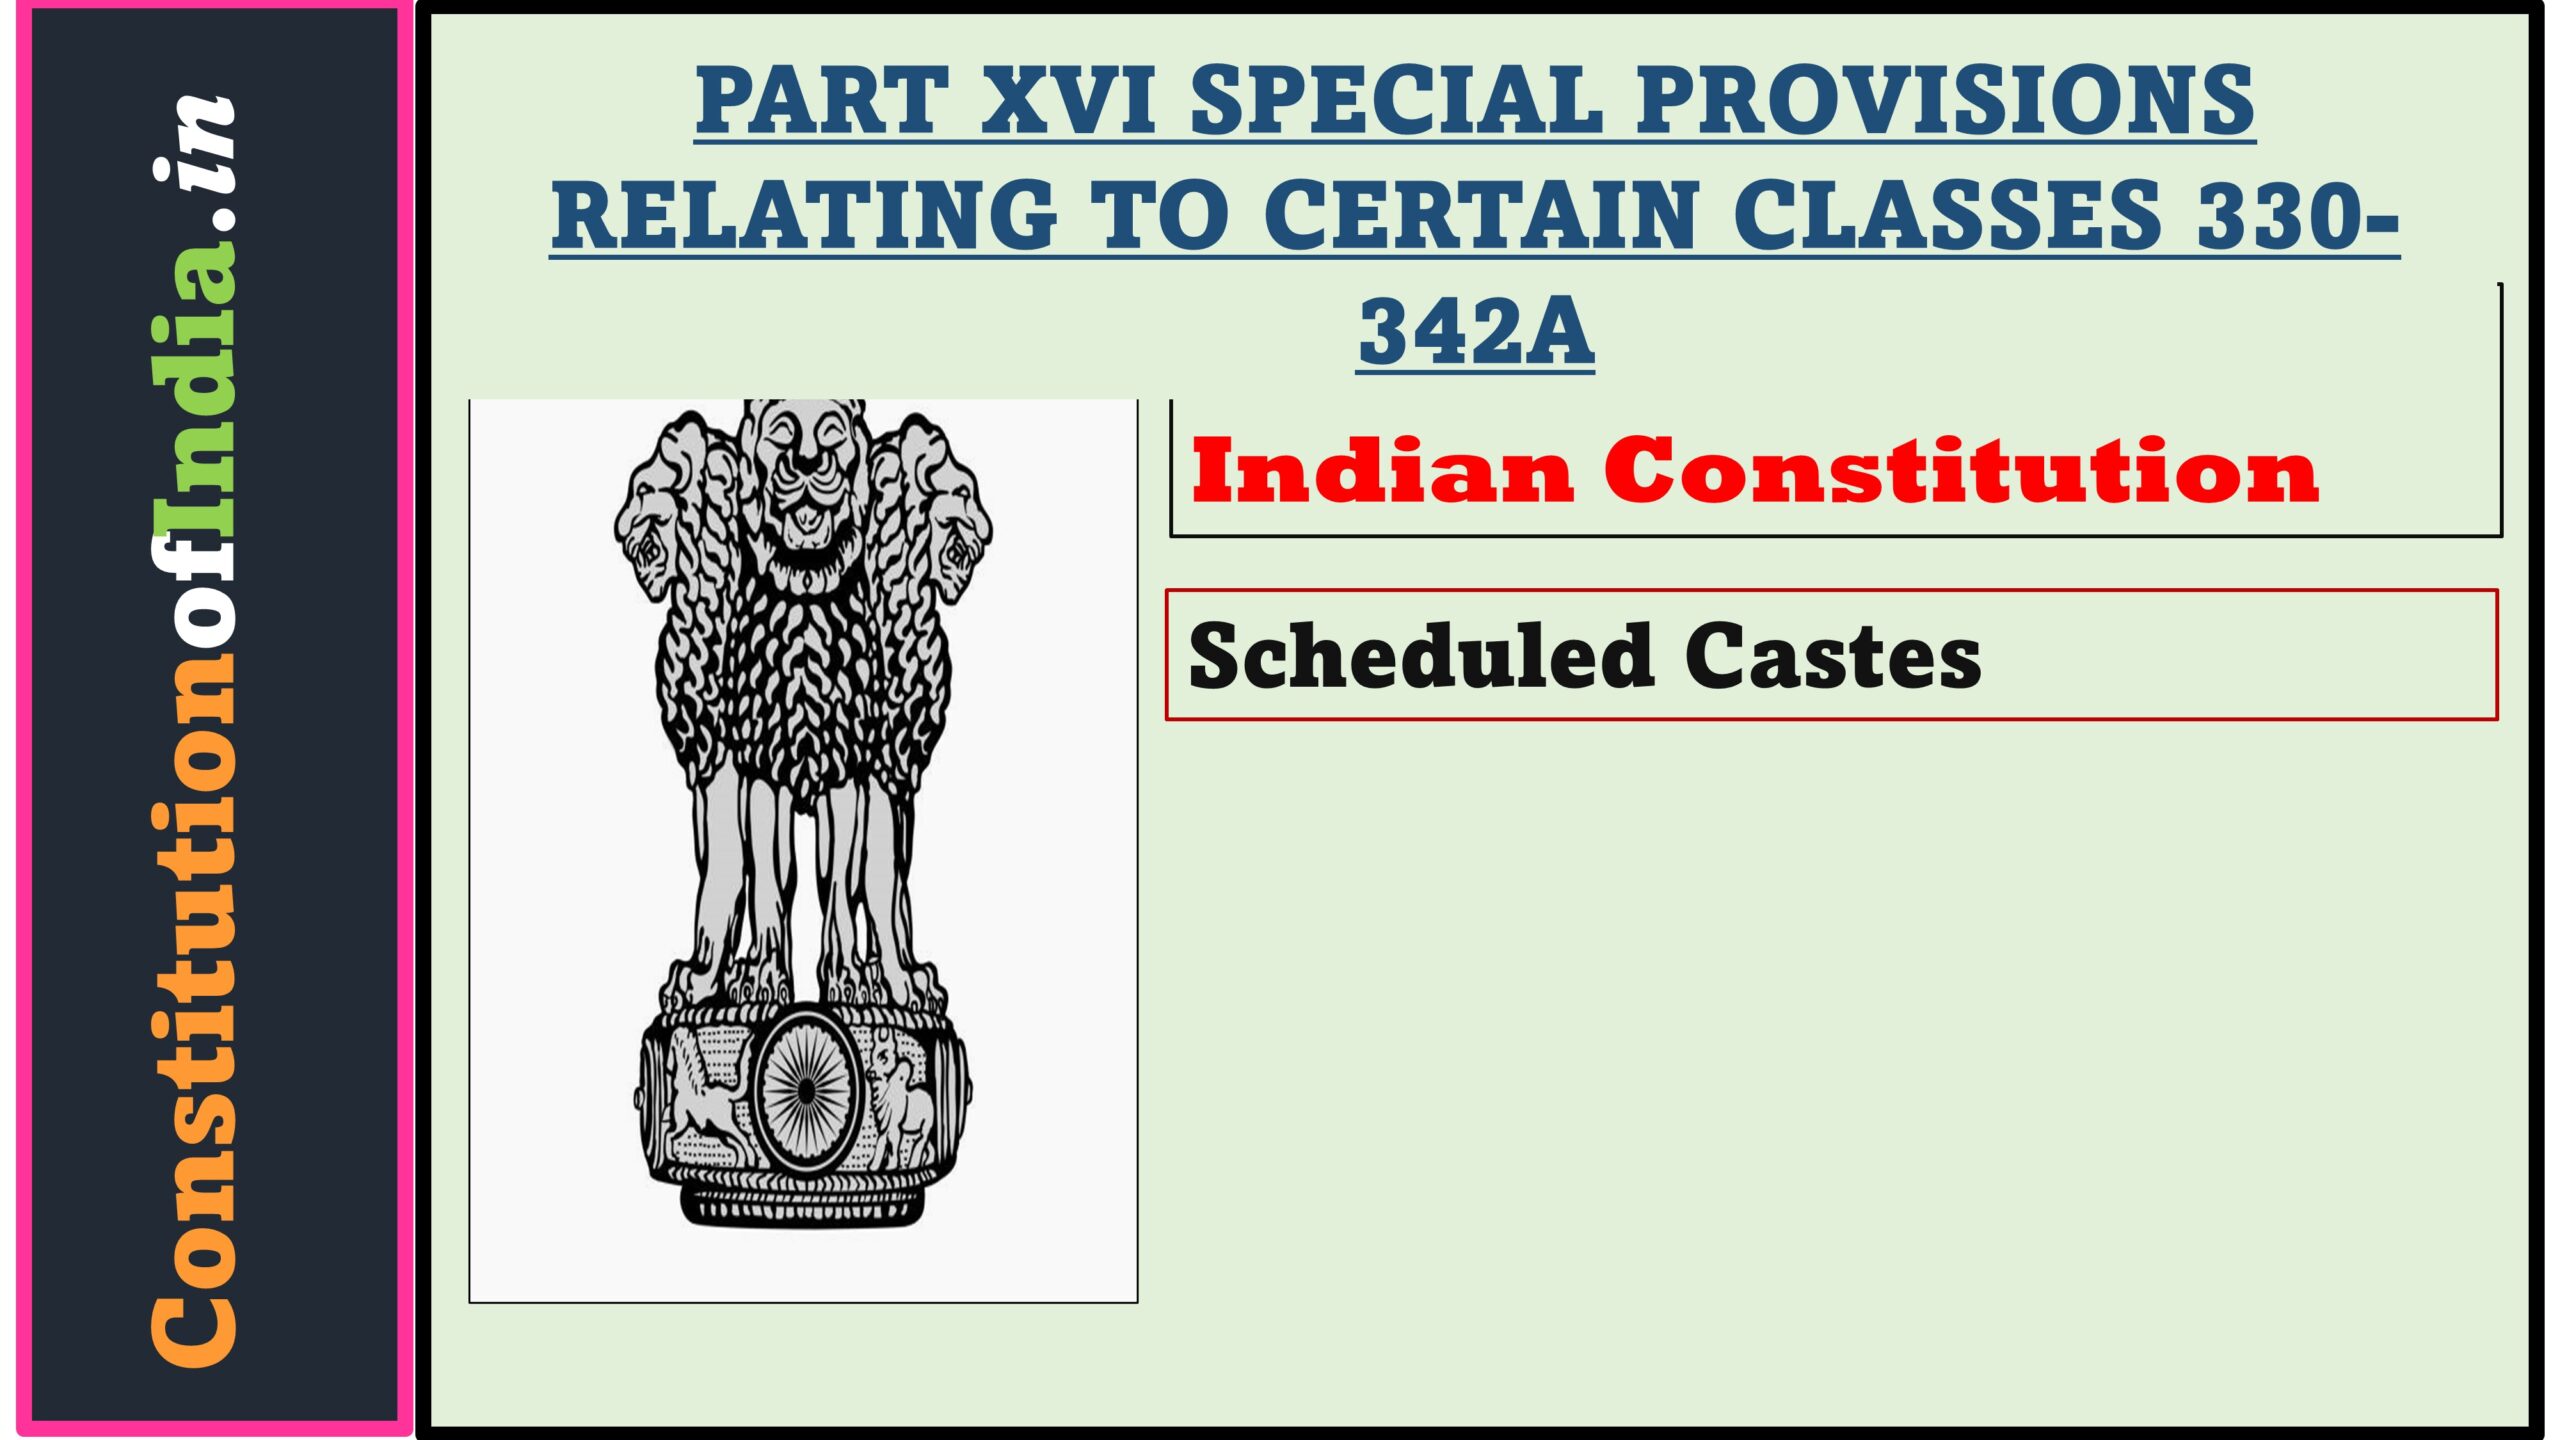 Article 341 of The Indian Constitution